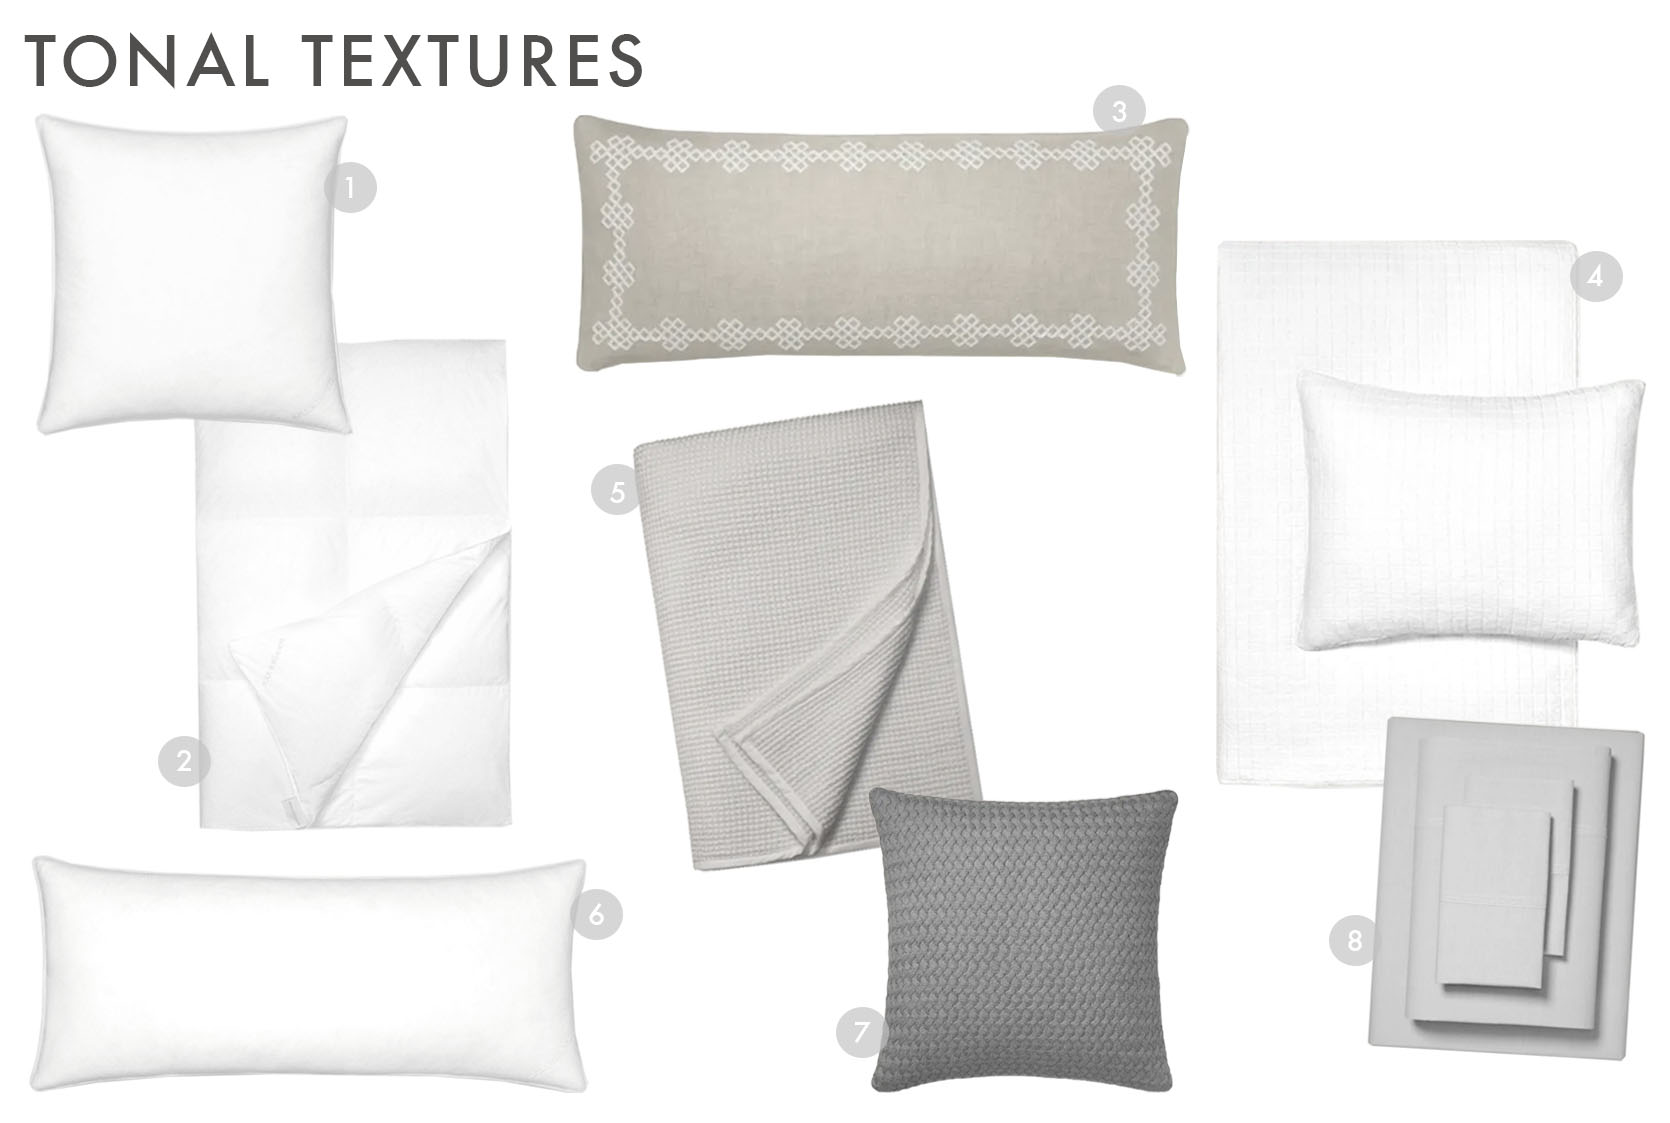 3 Practical, Simple, Comfy Bedding Combos We’re Loving for Fall